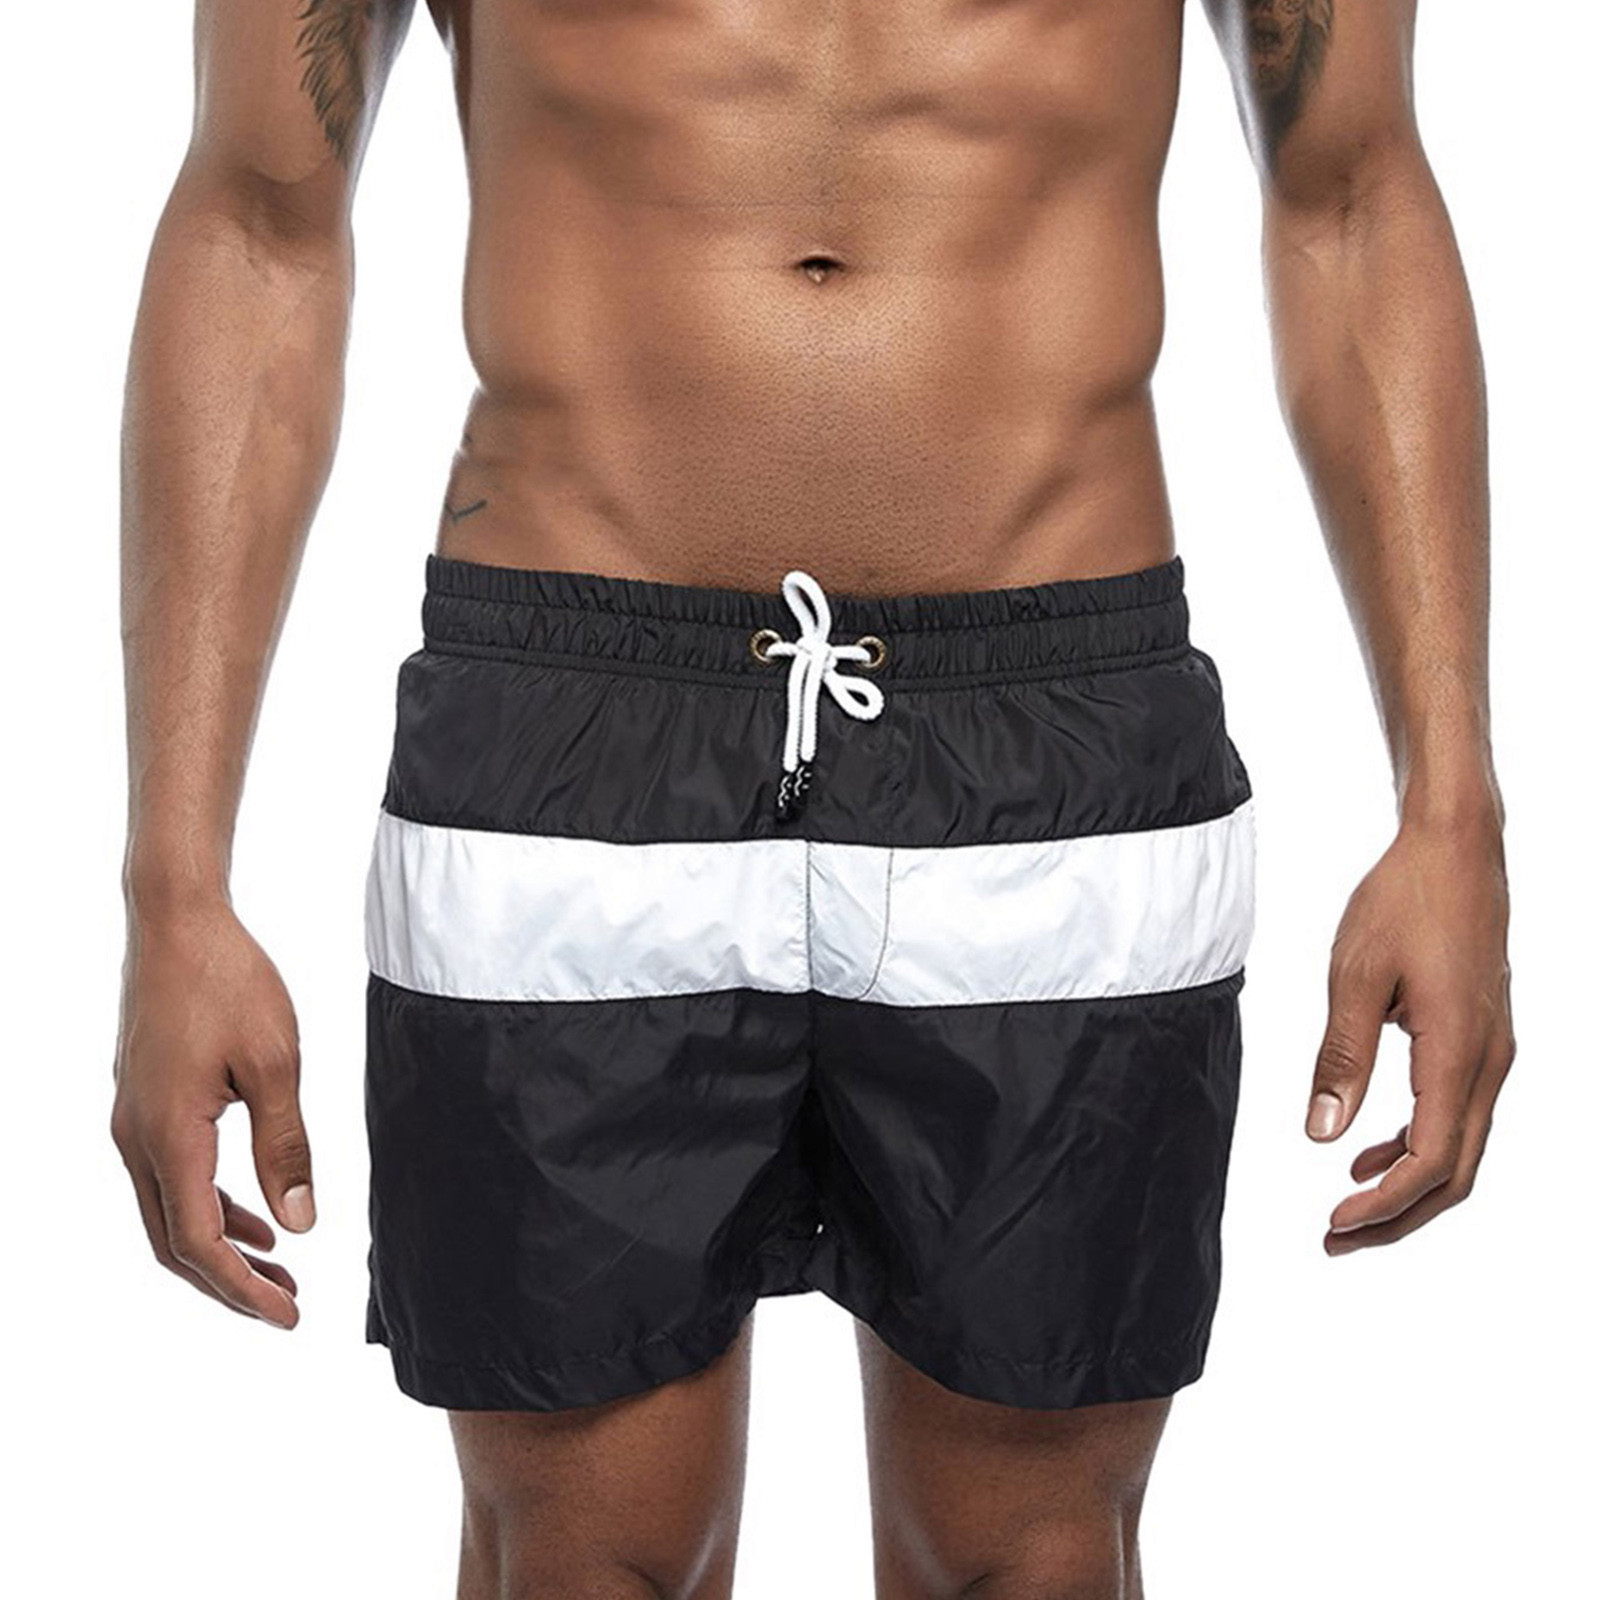 Men Spring Summer Splicing Swimming Trousers Beach Swiming Surfing Shorts Pants 